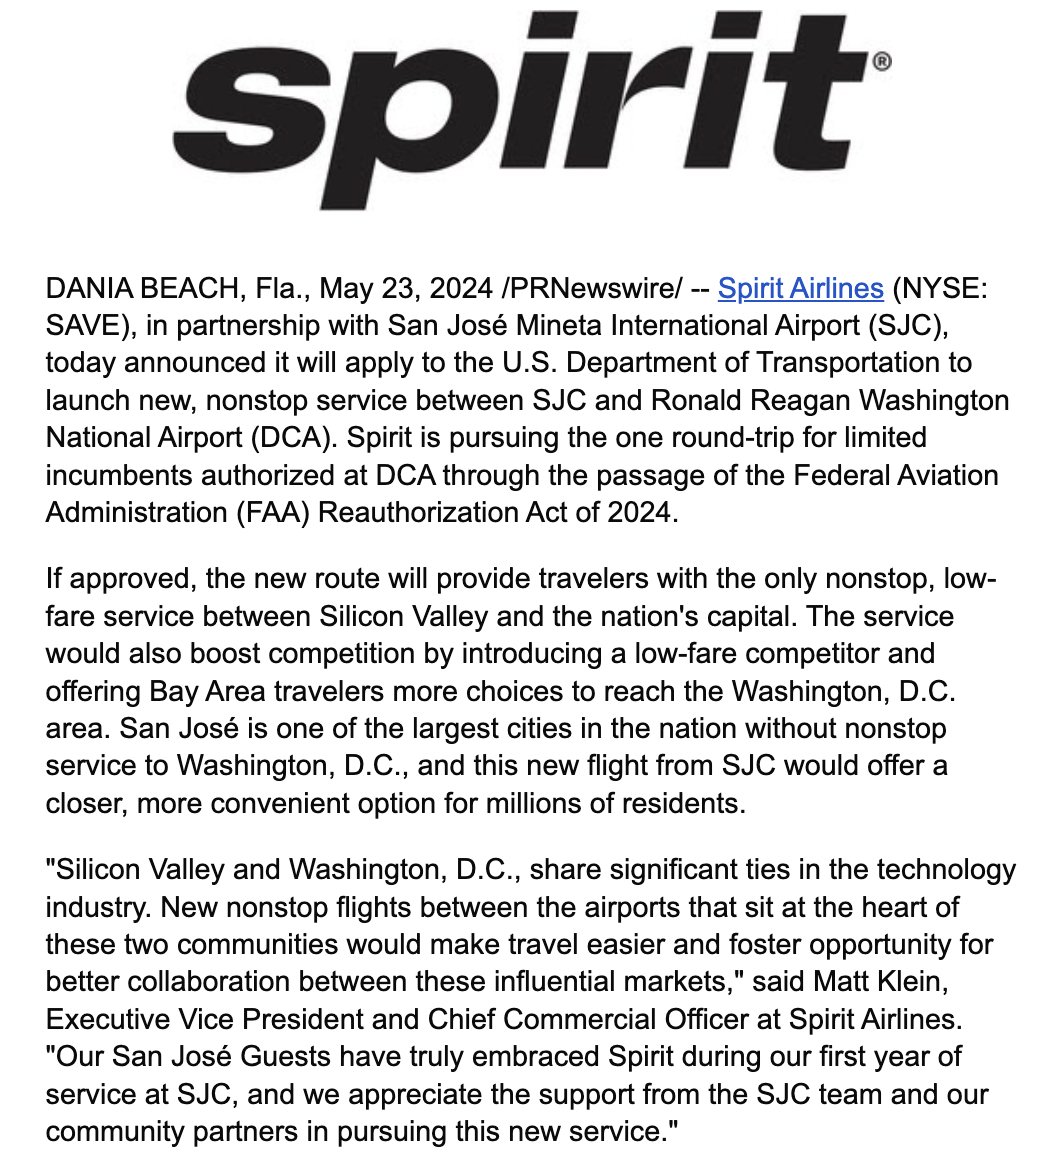 .@SpiritAirlines throws its hat in the ring with @FlySJC for 1 of the 5 new beyond-perimeter slot pairs at @Reagan_Airport proposing the first-ever DCA-SJC nonstop. If approved, this would be Spirit's only flight to DCA, which it left in 2012 to concentrate flights at BWI.